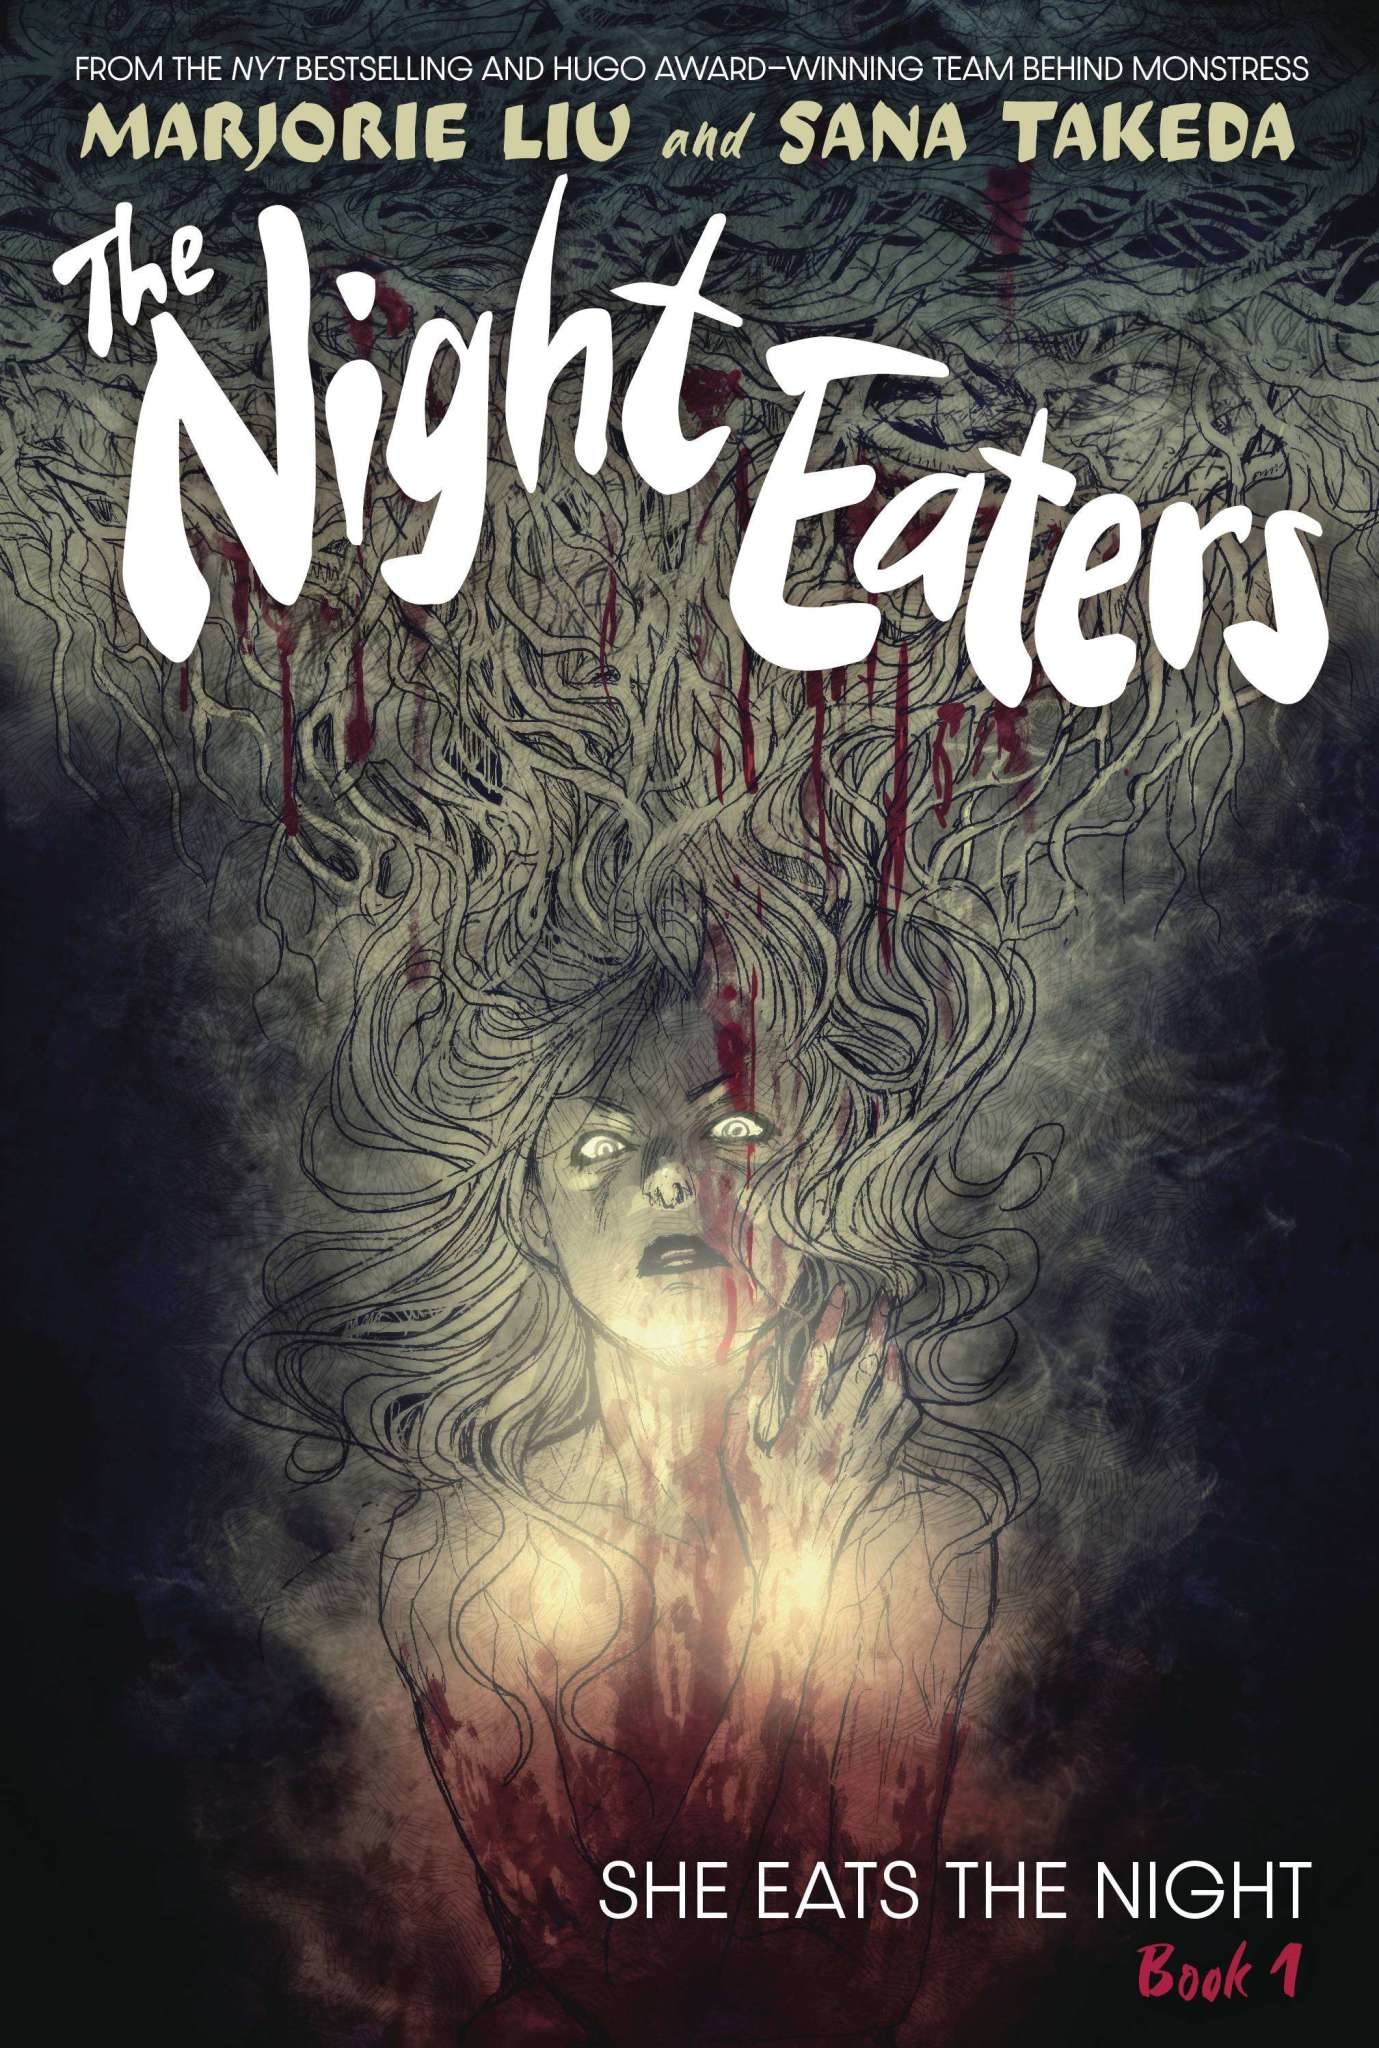 Abrams Comicarts Night Eaters Gn Vol 01 She Eats At Night Signed PX ED